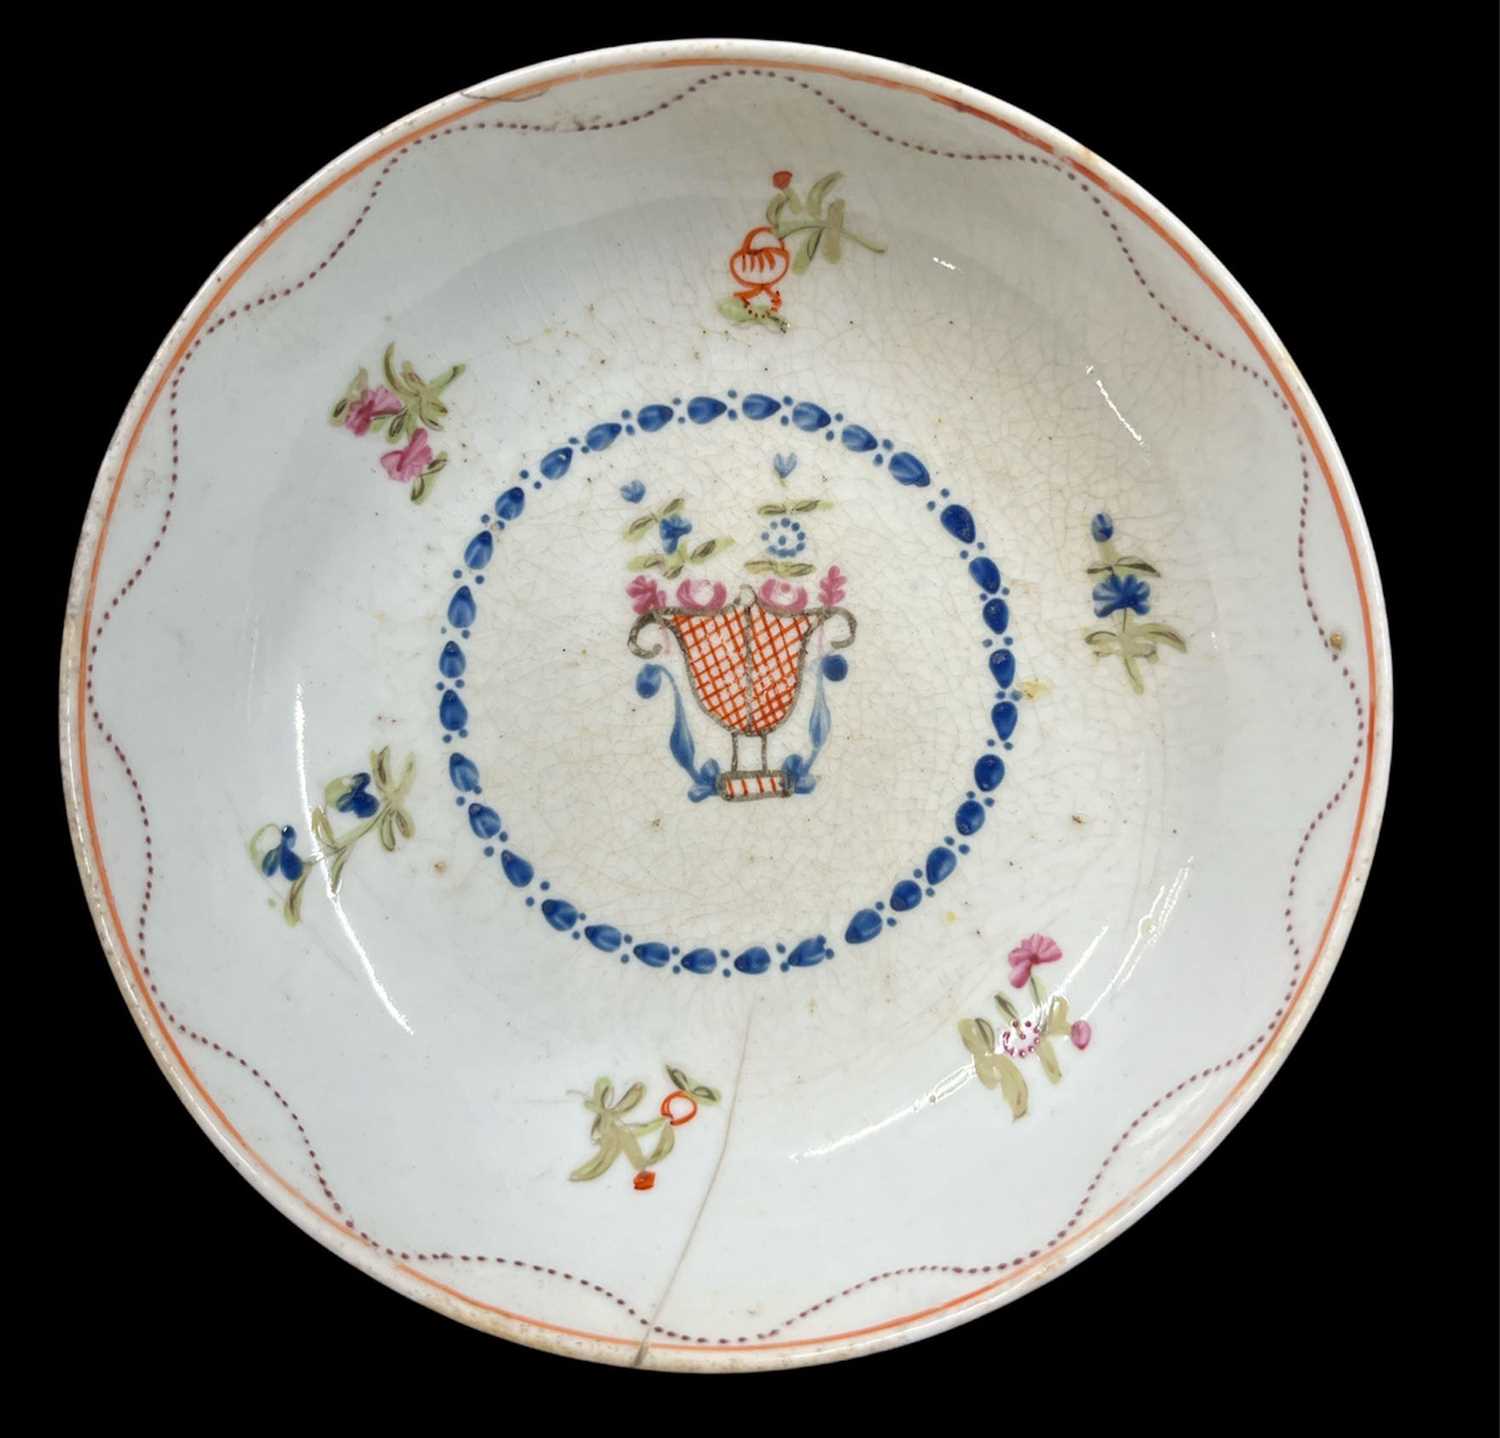 An 18th century English porcelain saucer by Newhall, with a dotted purple border